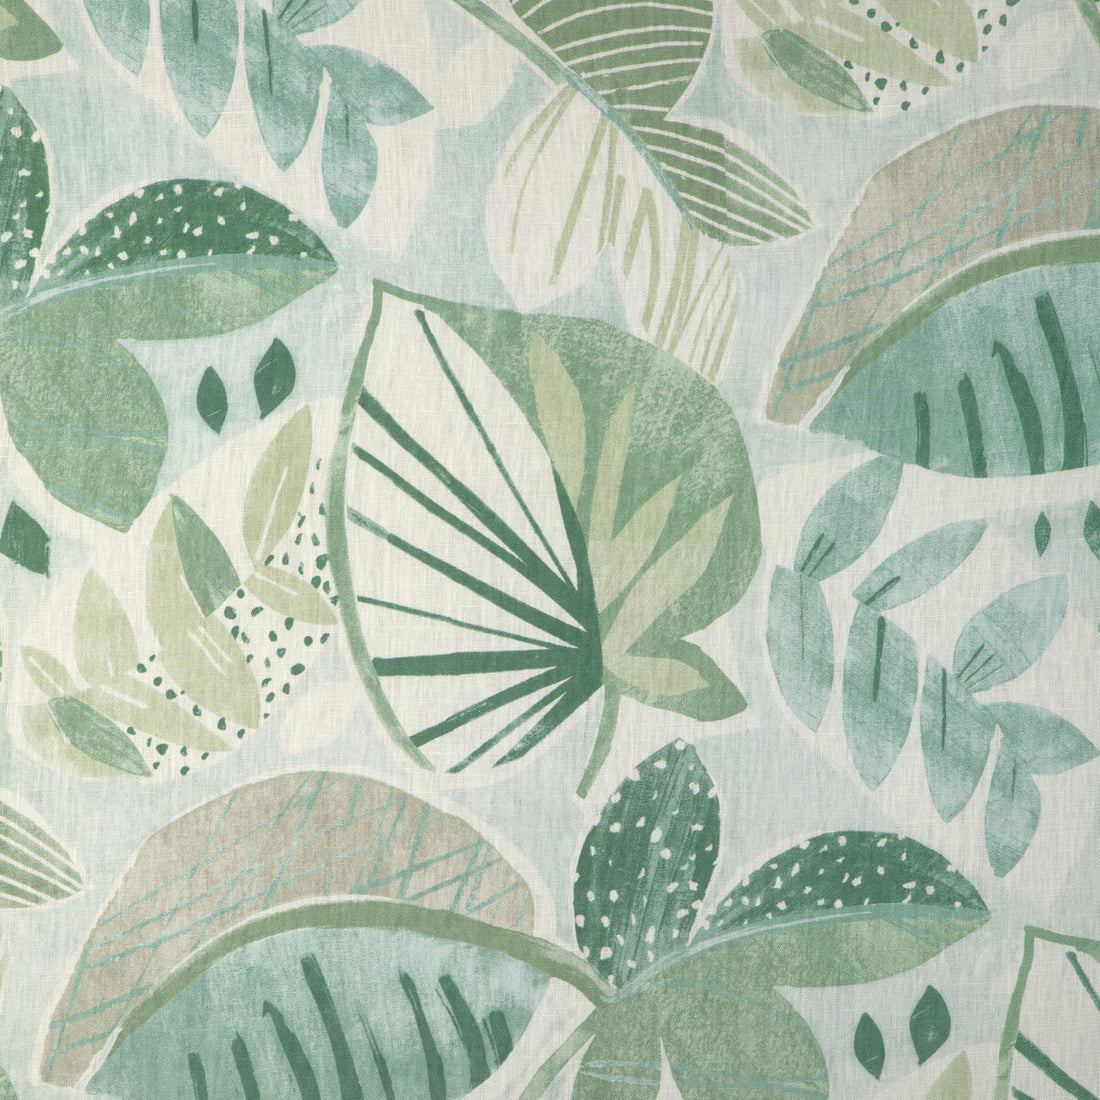 Leaf-A-Lot fabric in aloe color - pattern LEAF-A-LOT.3.0 - by Kravet Basics in the Mid-Century Modern collection